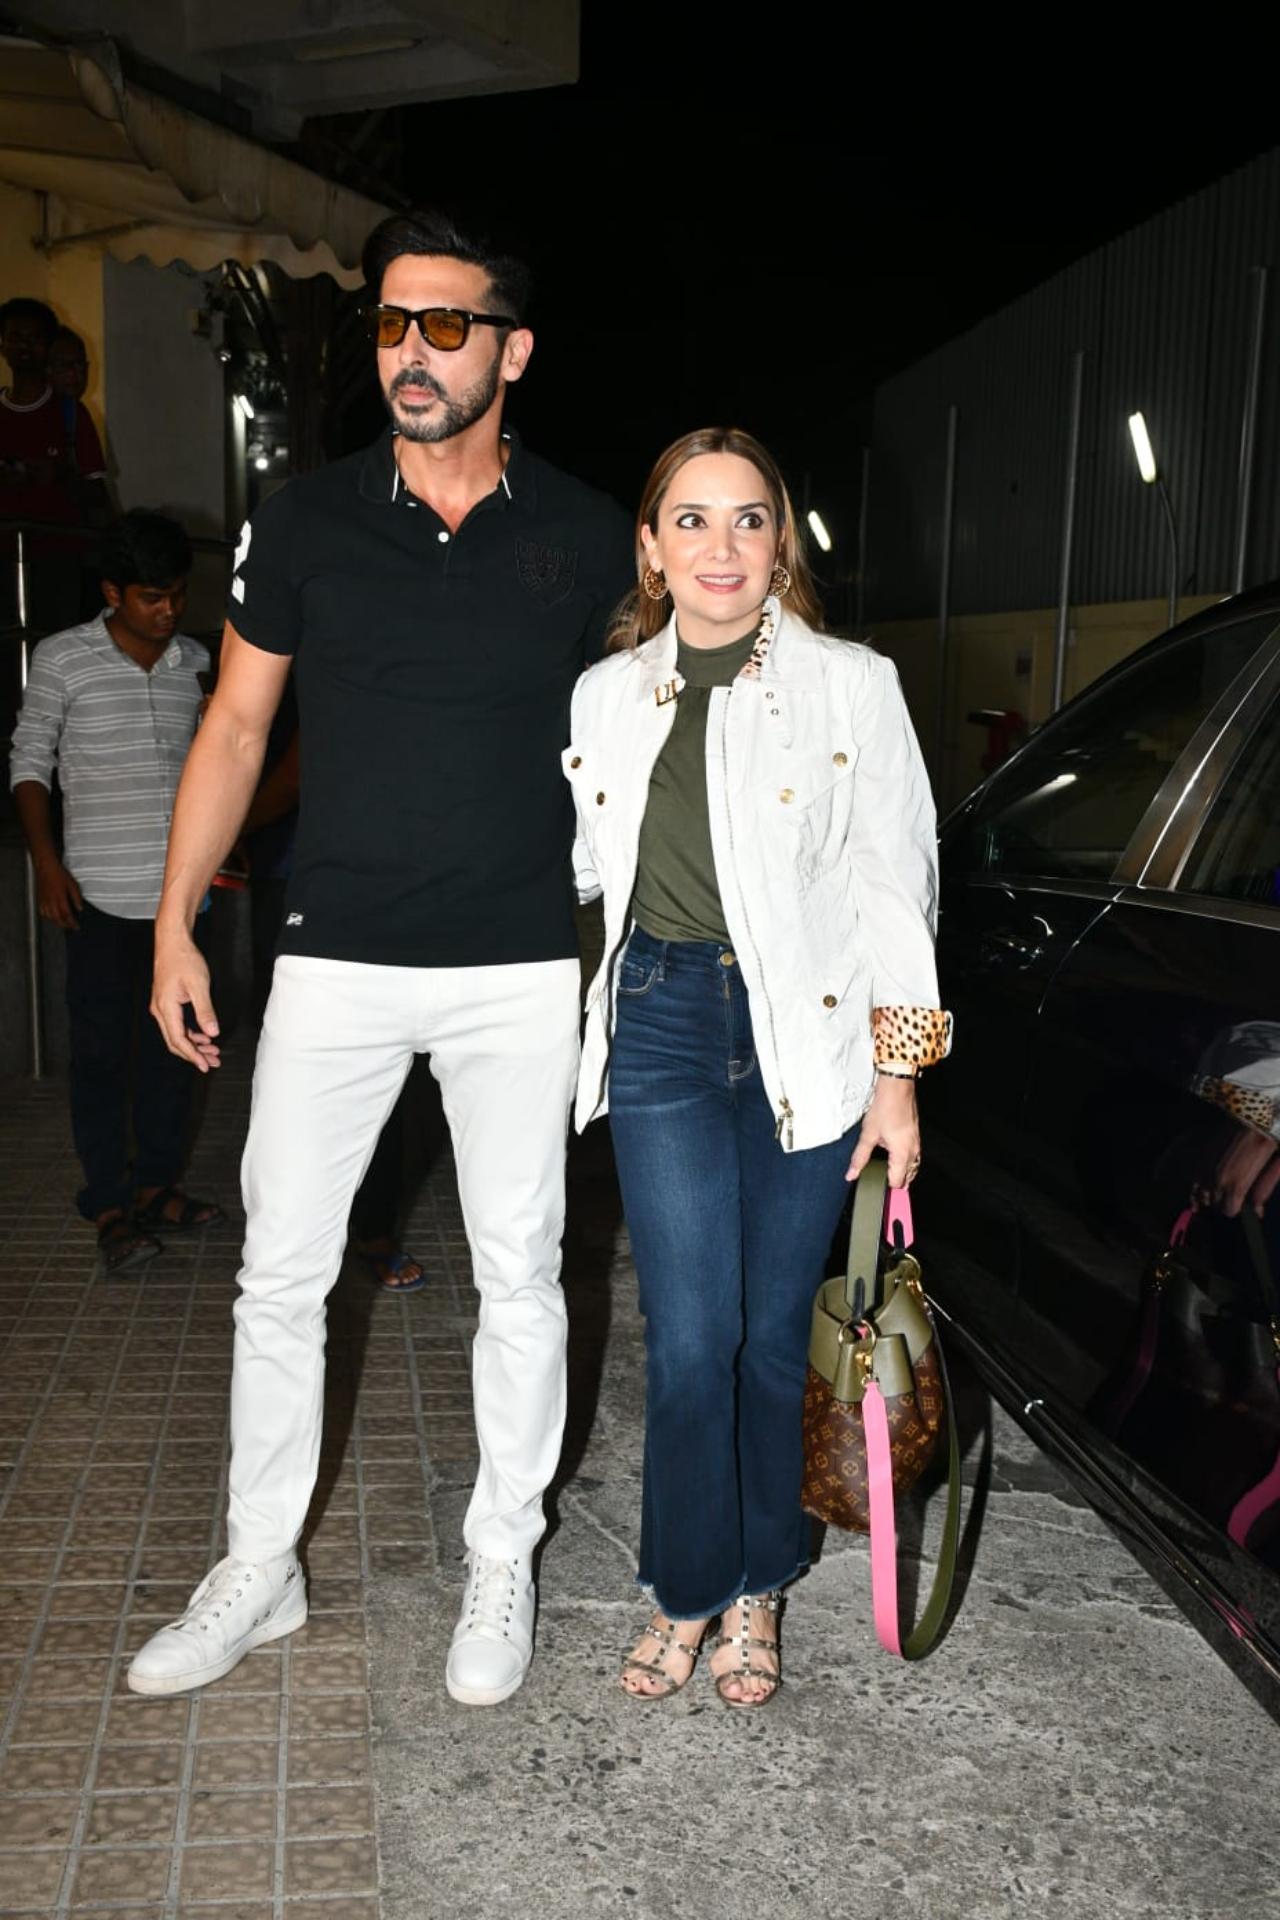 Zayed Khan along with his wife was also spotted at the screening